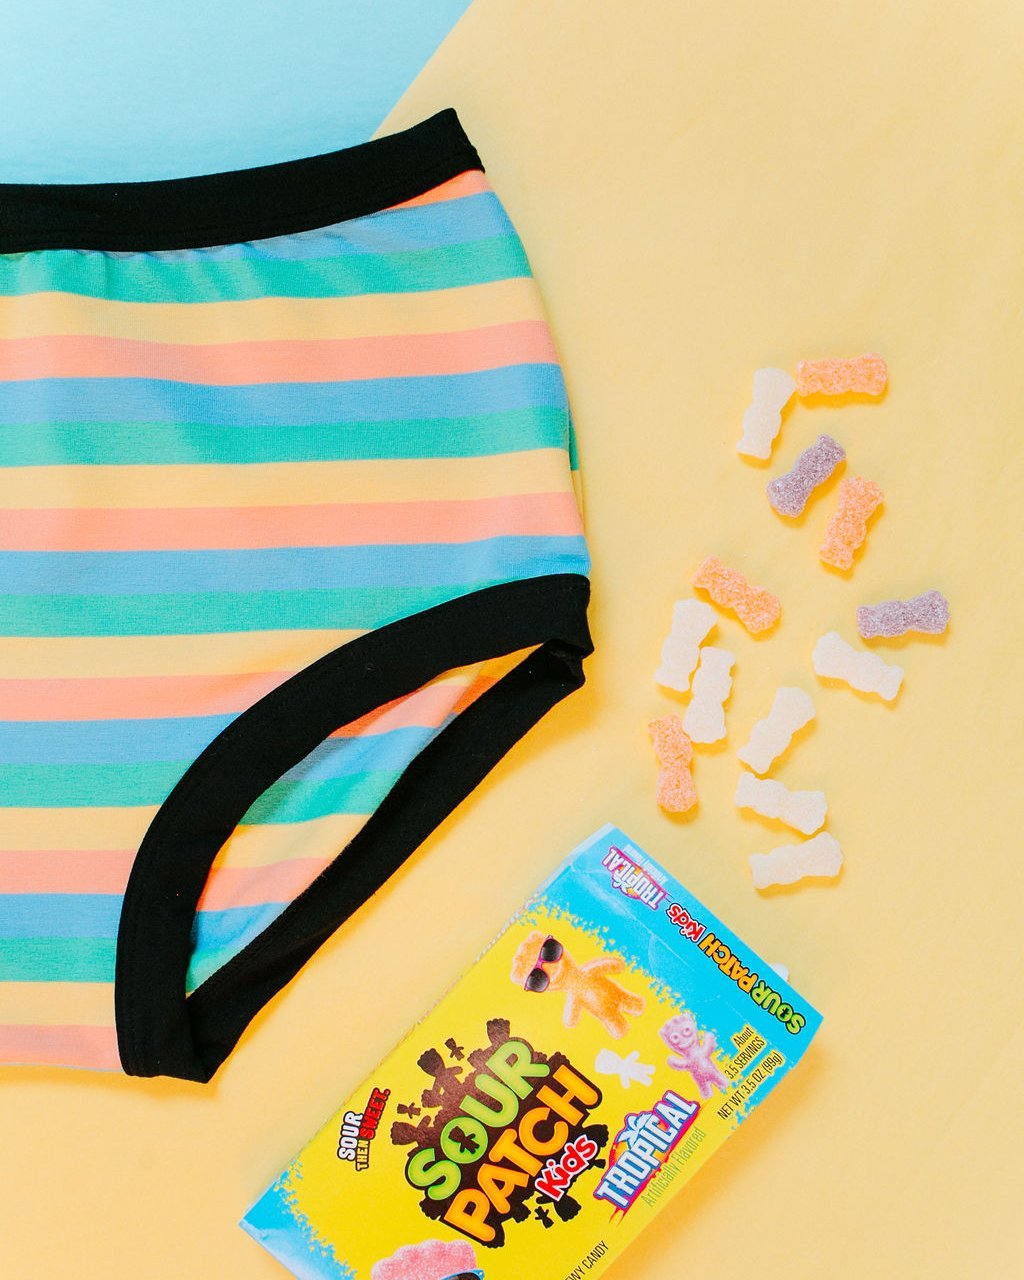 Flat lay of Thunderpants organic cotton Women’s Original style underwear in Pastel Rainbow Stripes with bright blue and yellow background and sour patch candy.